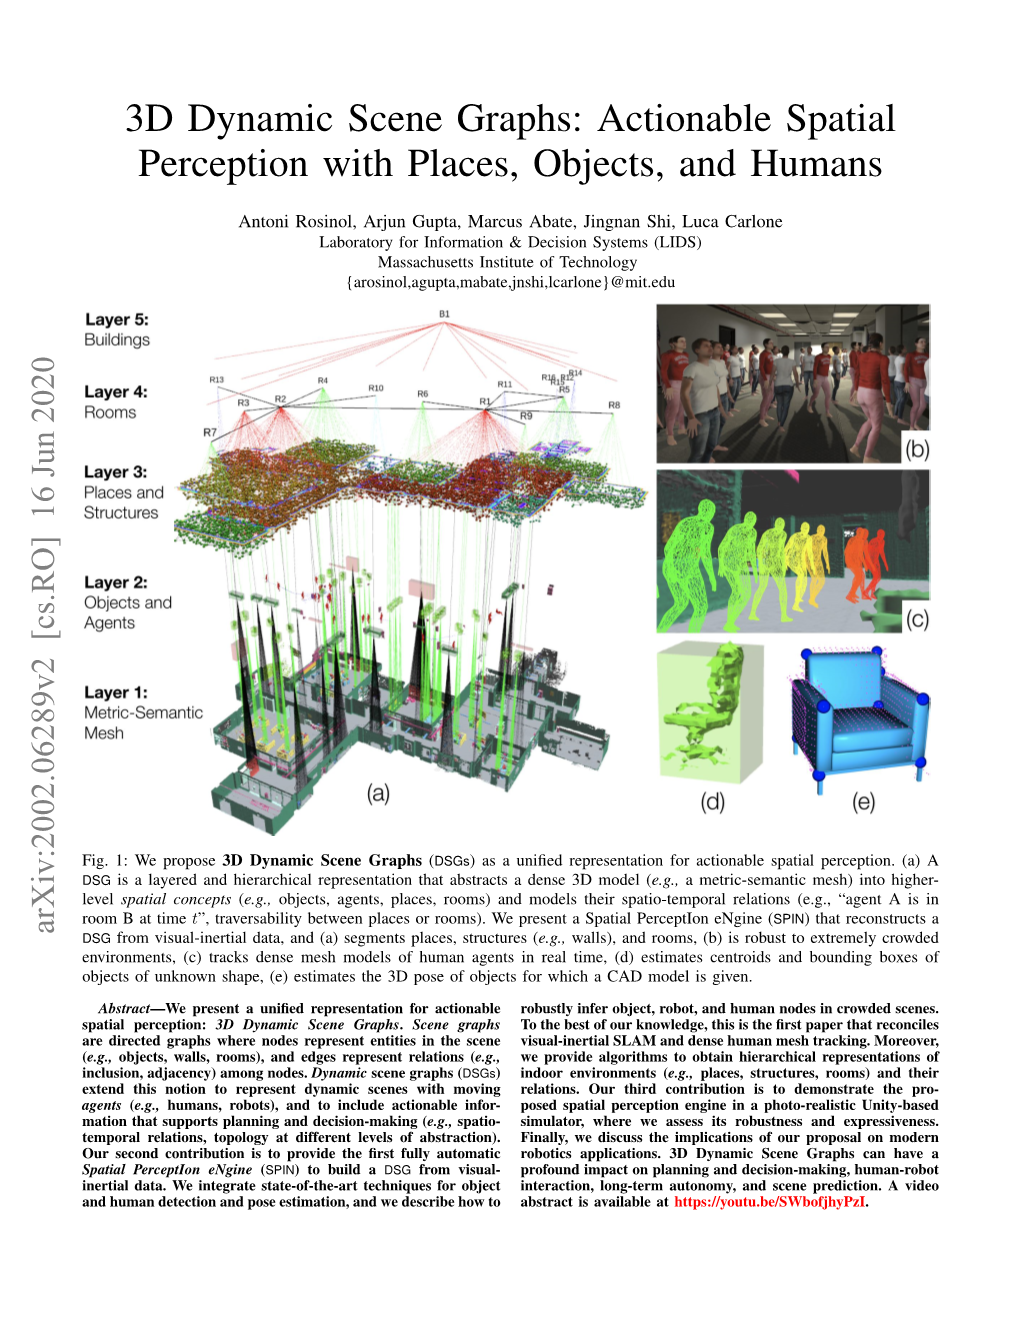 3D Dynamic Scene Graphs: Actionable Spatial Perception with Places, Objects, and Humans